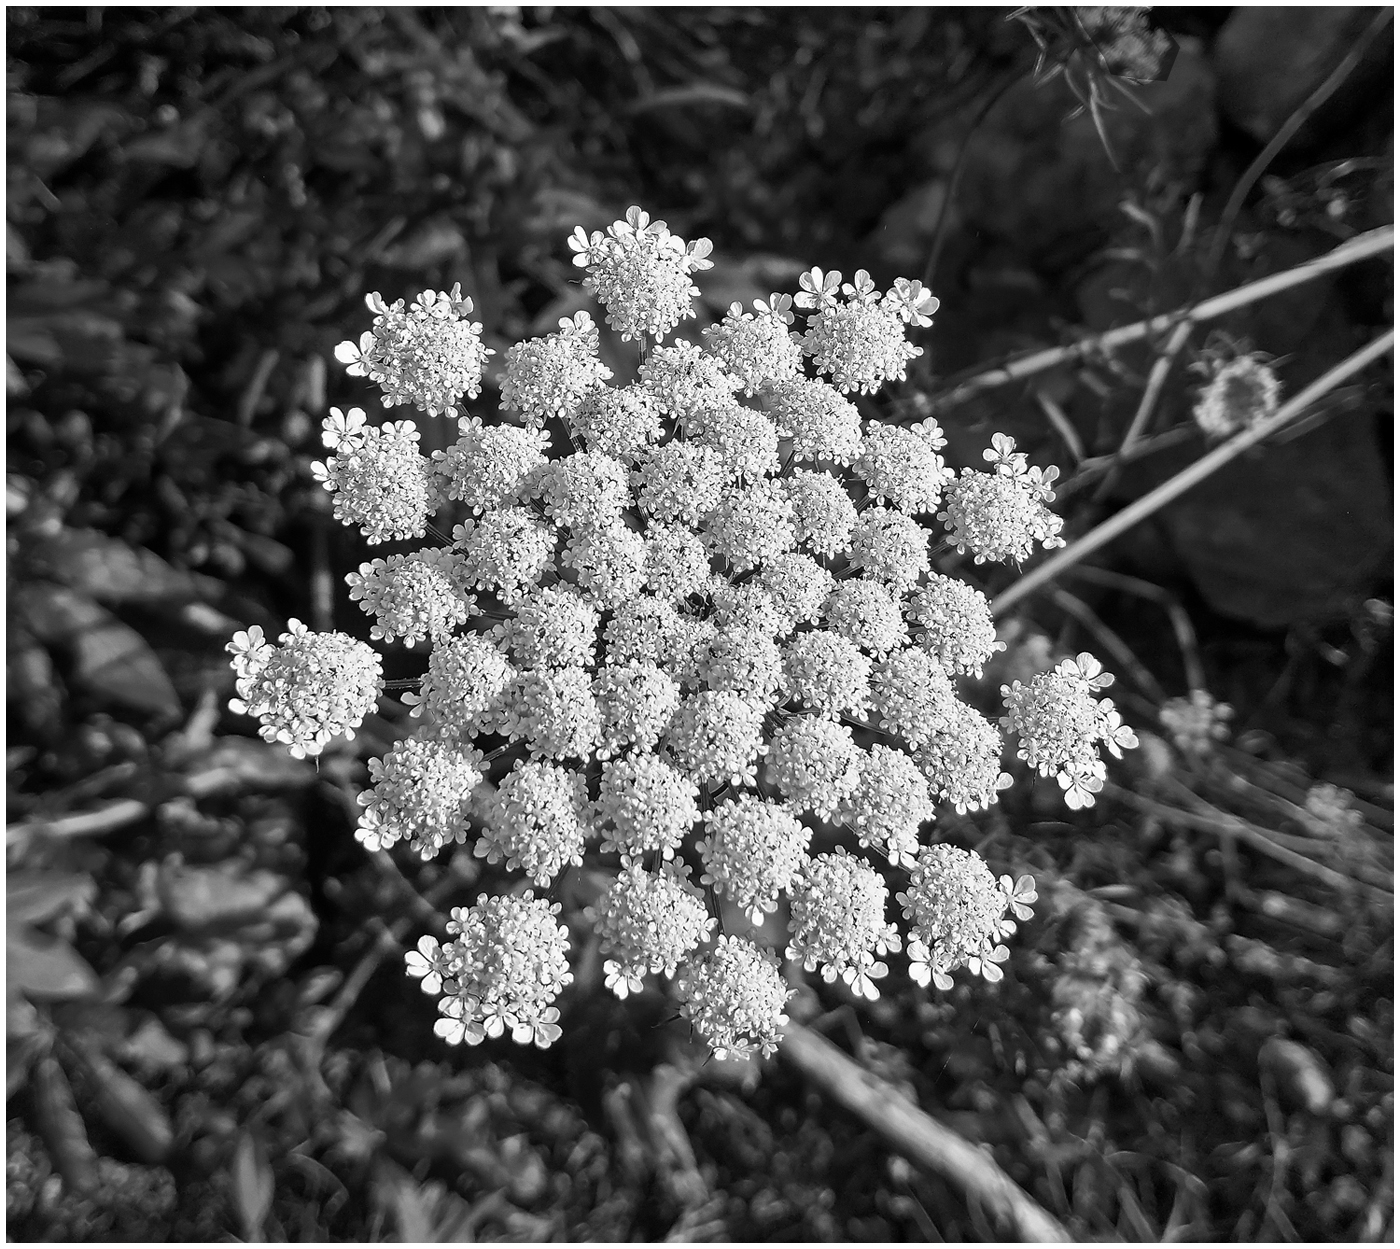 Queen Anne's lace by Stephen Levitas